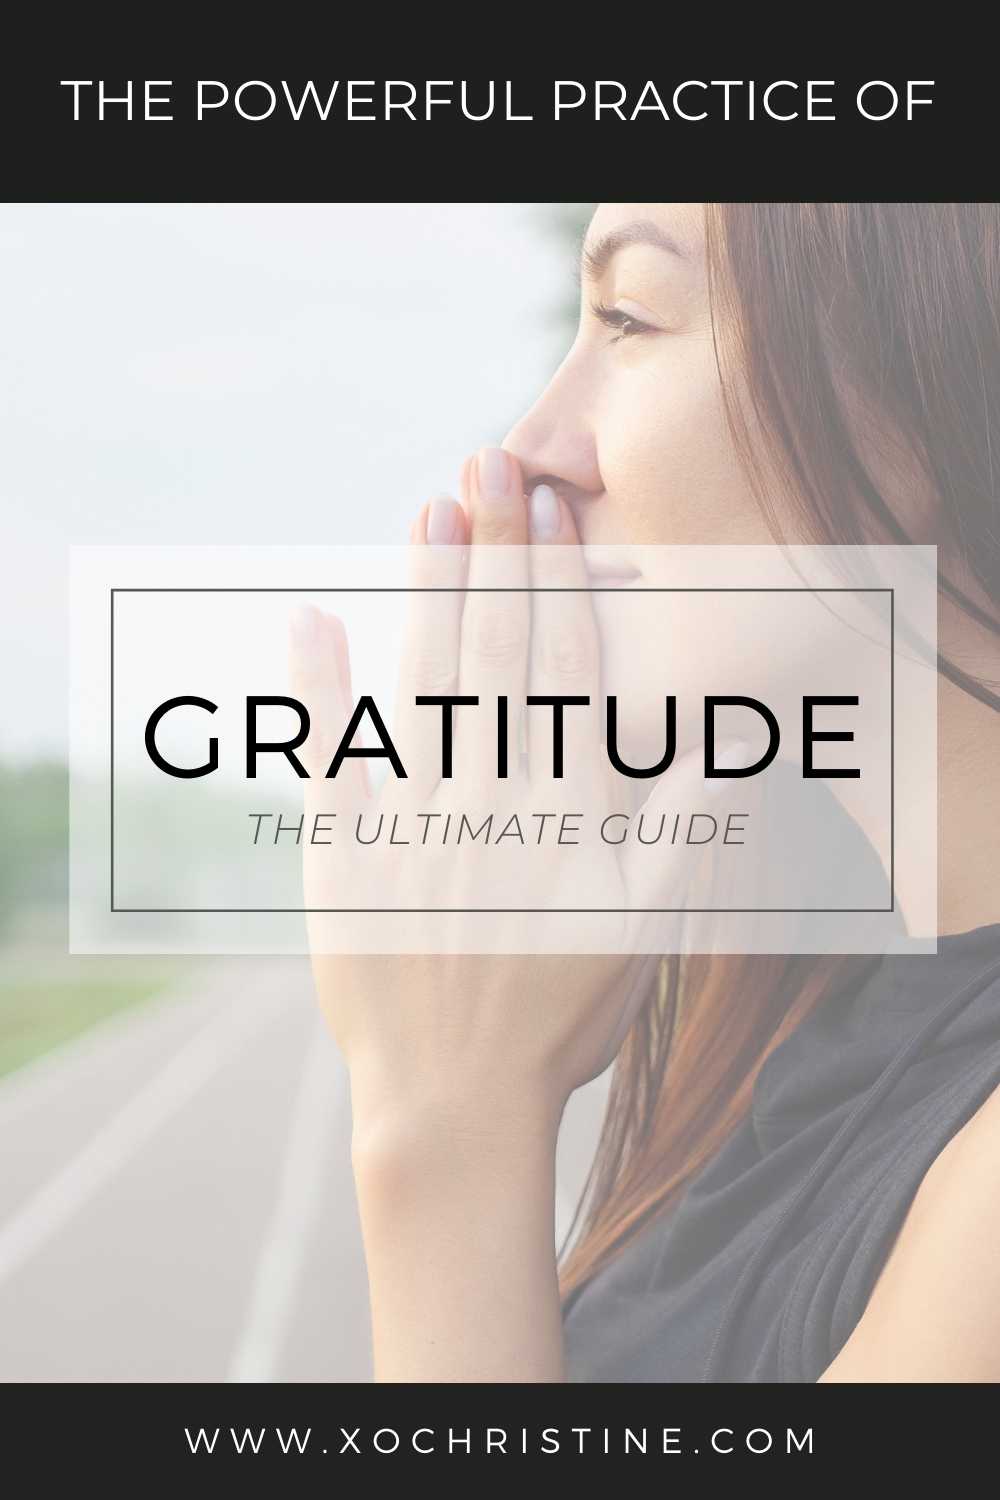 How to Cultivate an attitude of gratitude for a happier life